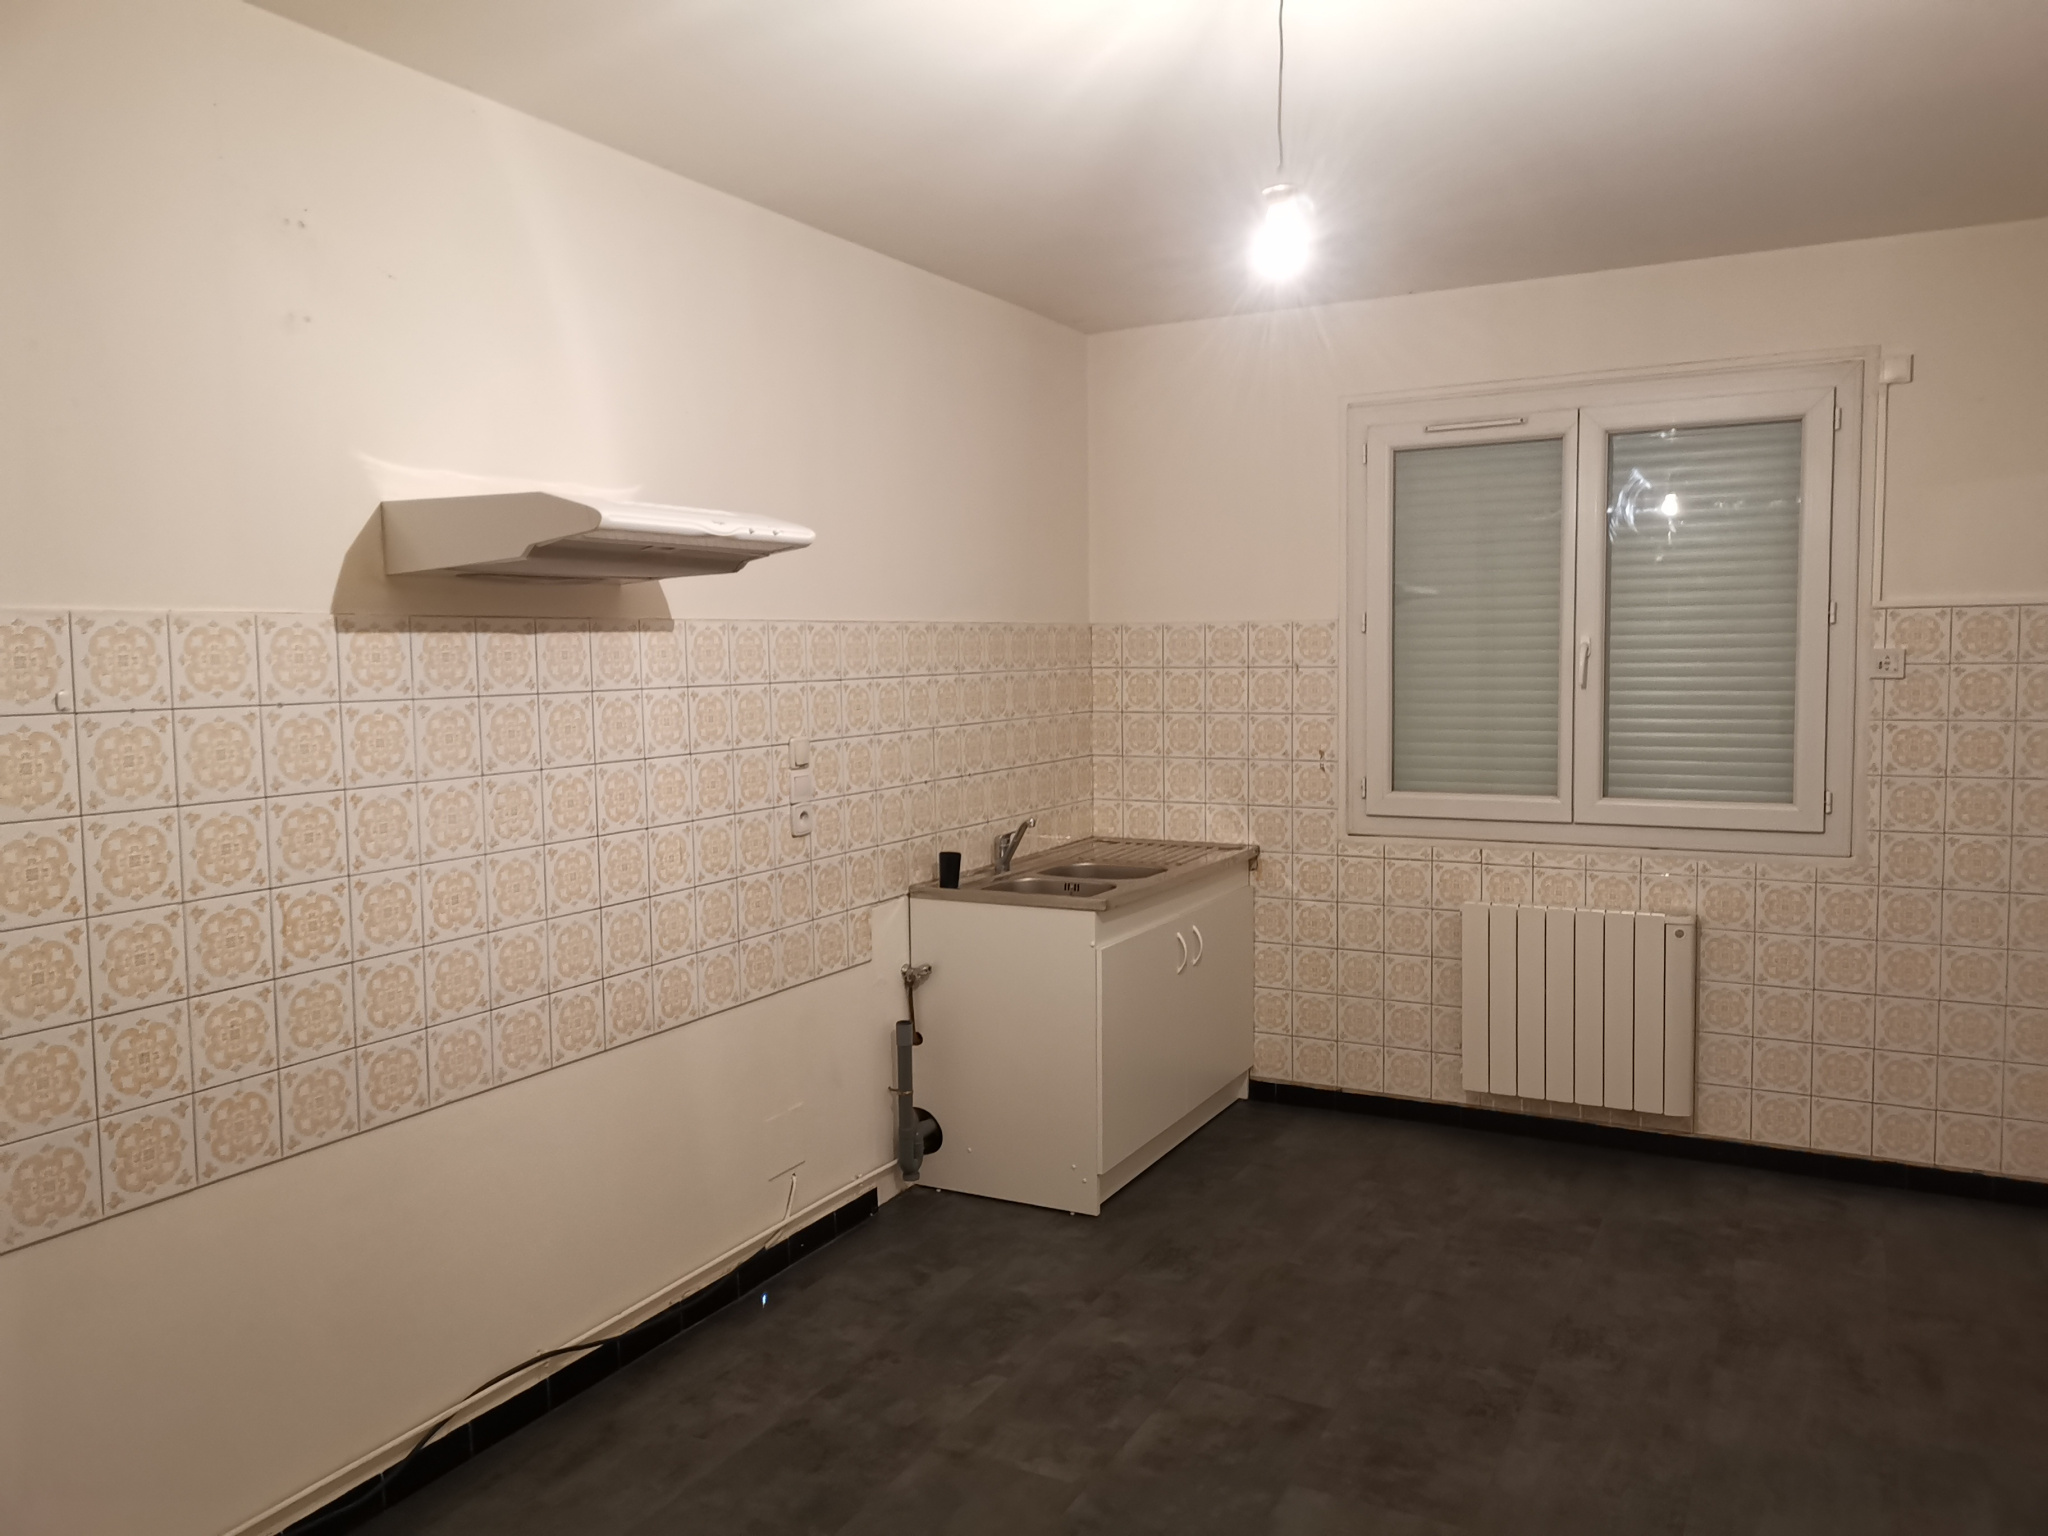  location  APPARTEMENT  TYPE T1 